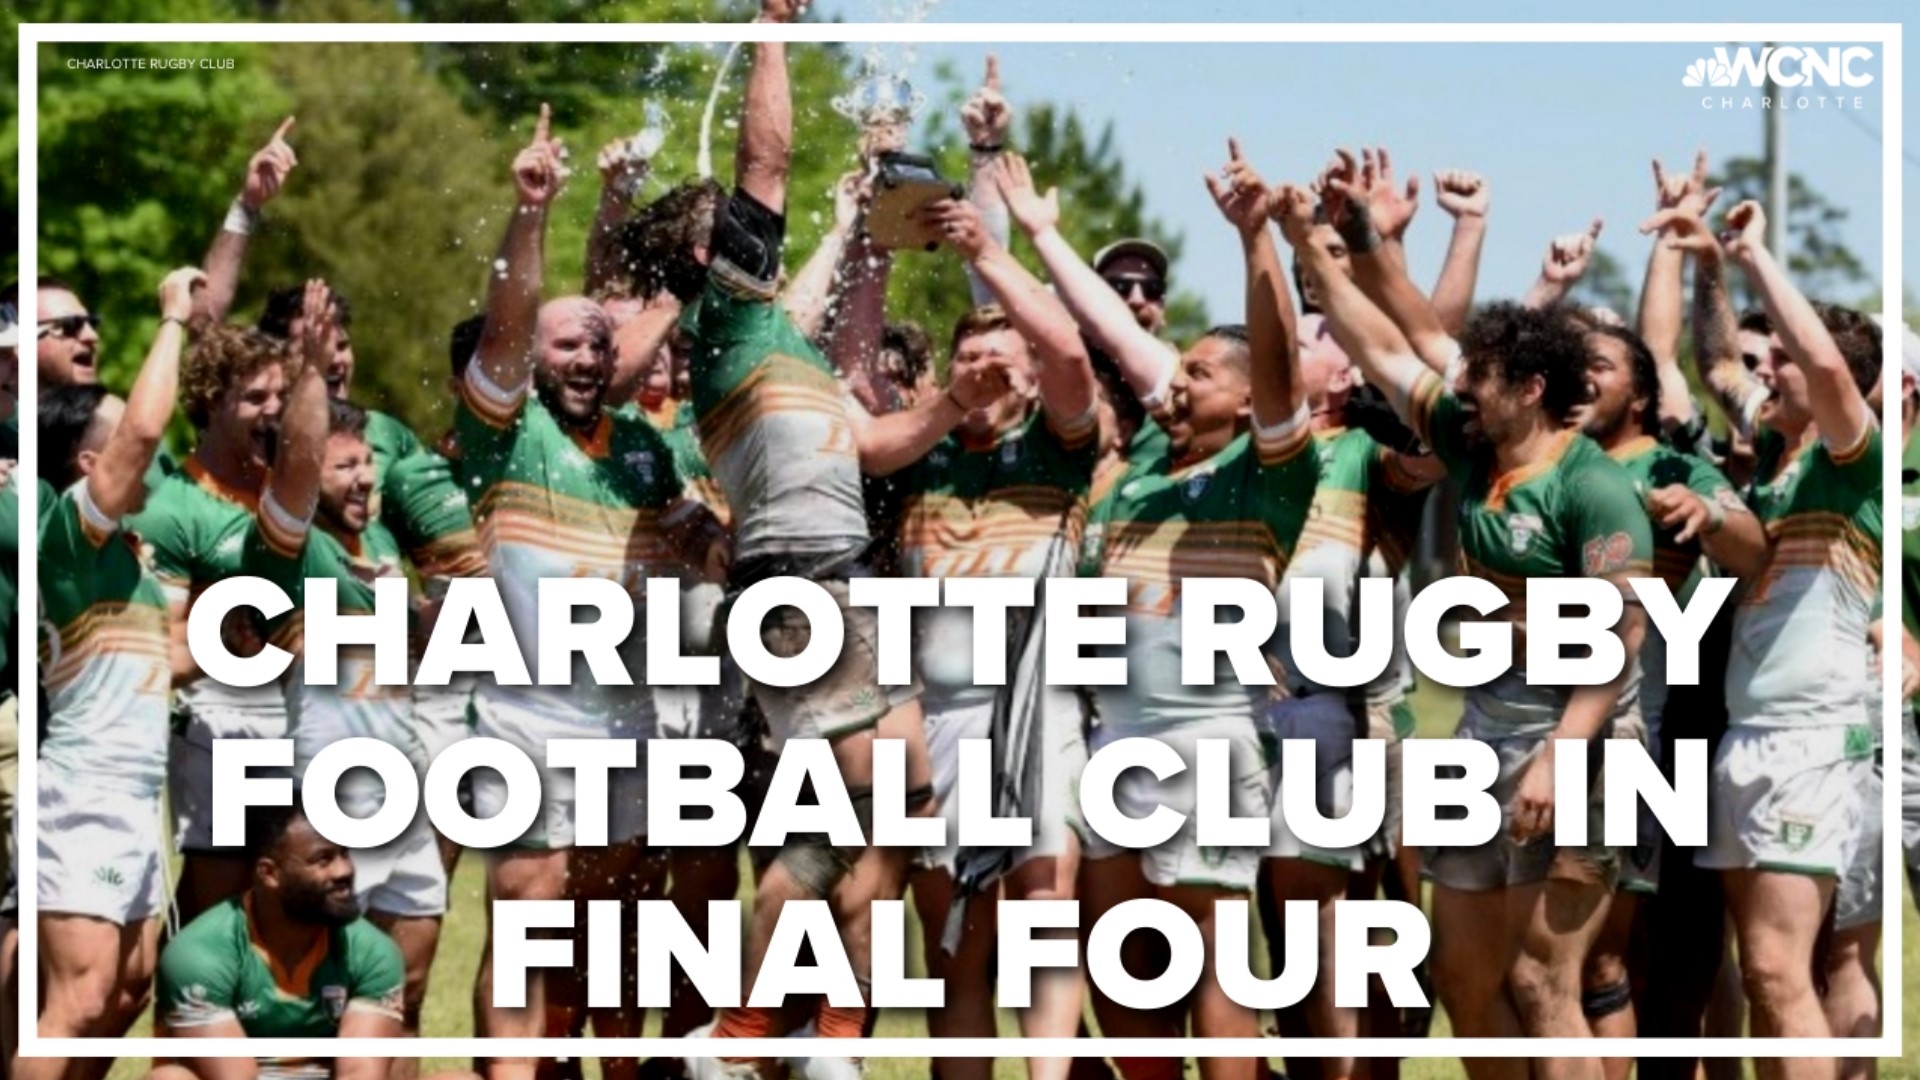 The D-2 men's Charlotte rugby football club is headed to Atlanta this weekend after clinching a spot in the final four of the national championship.